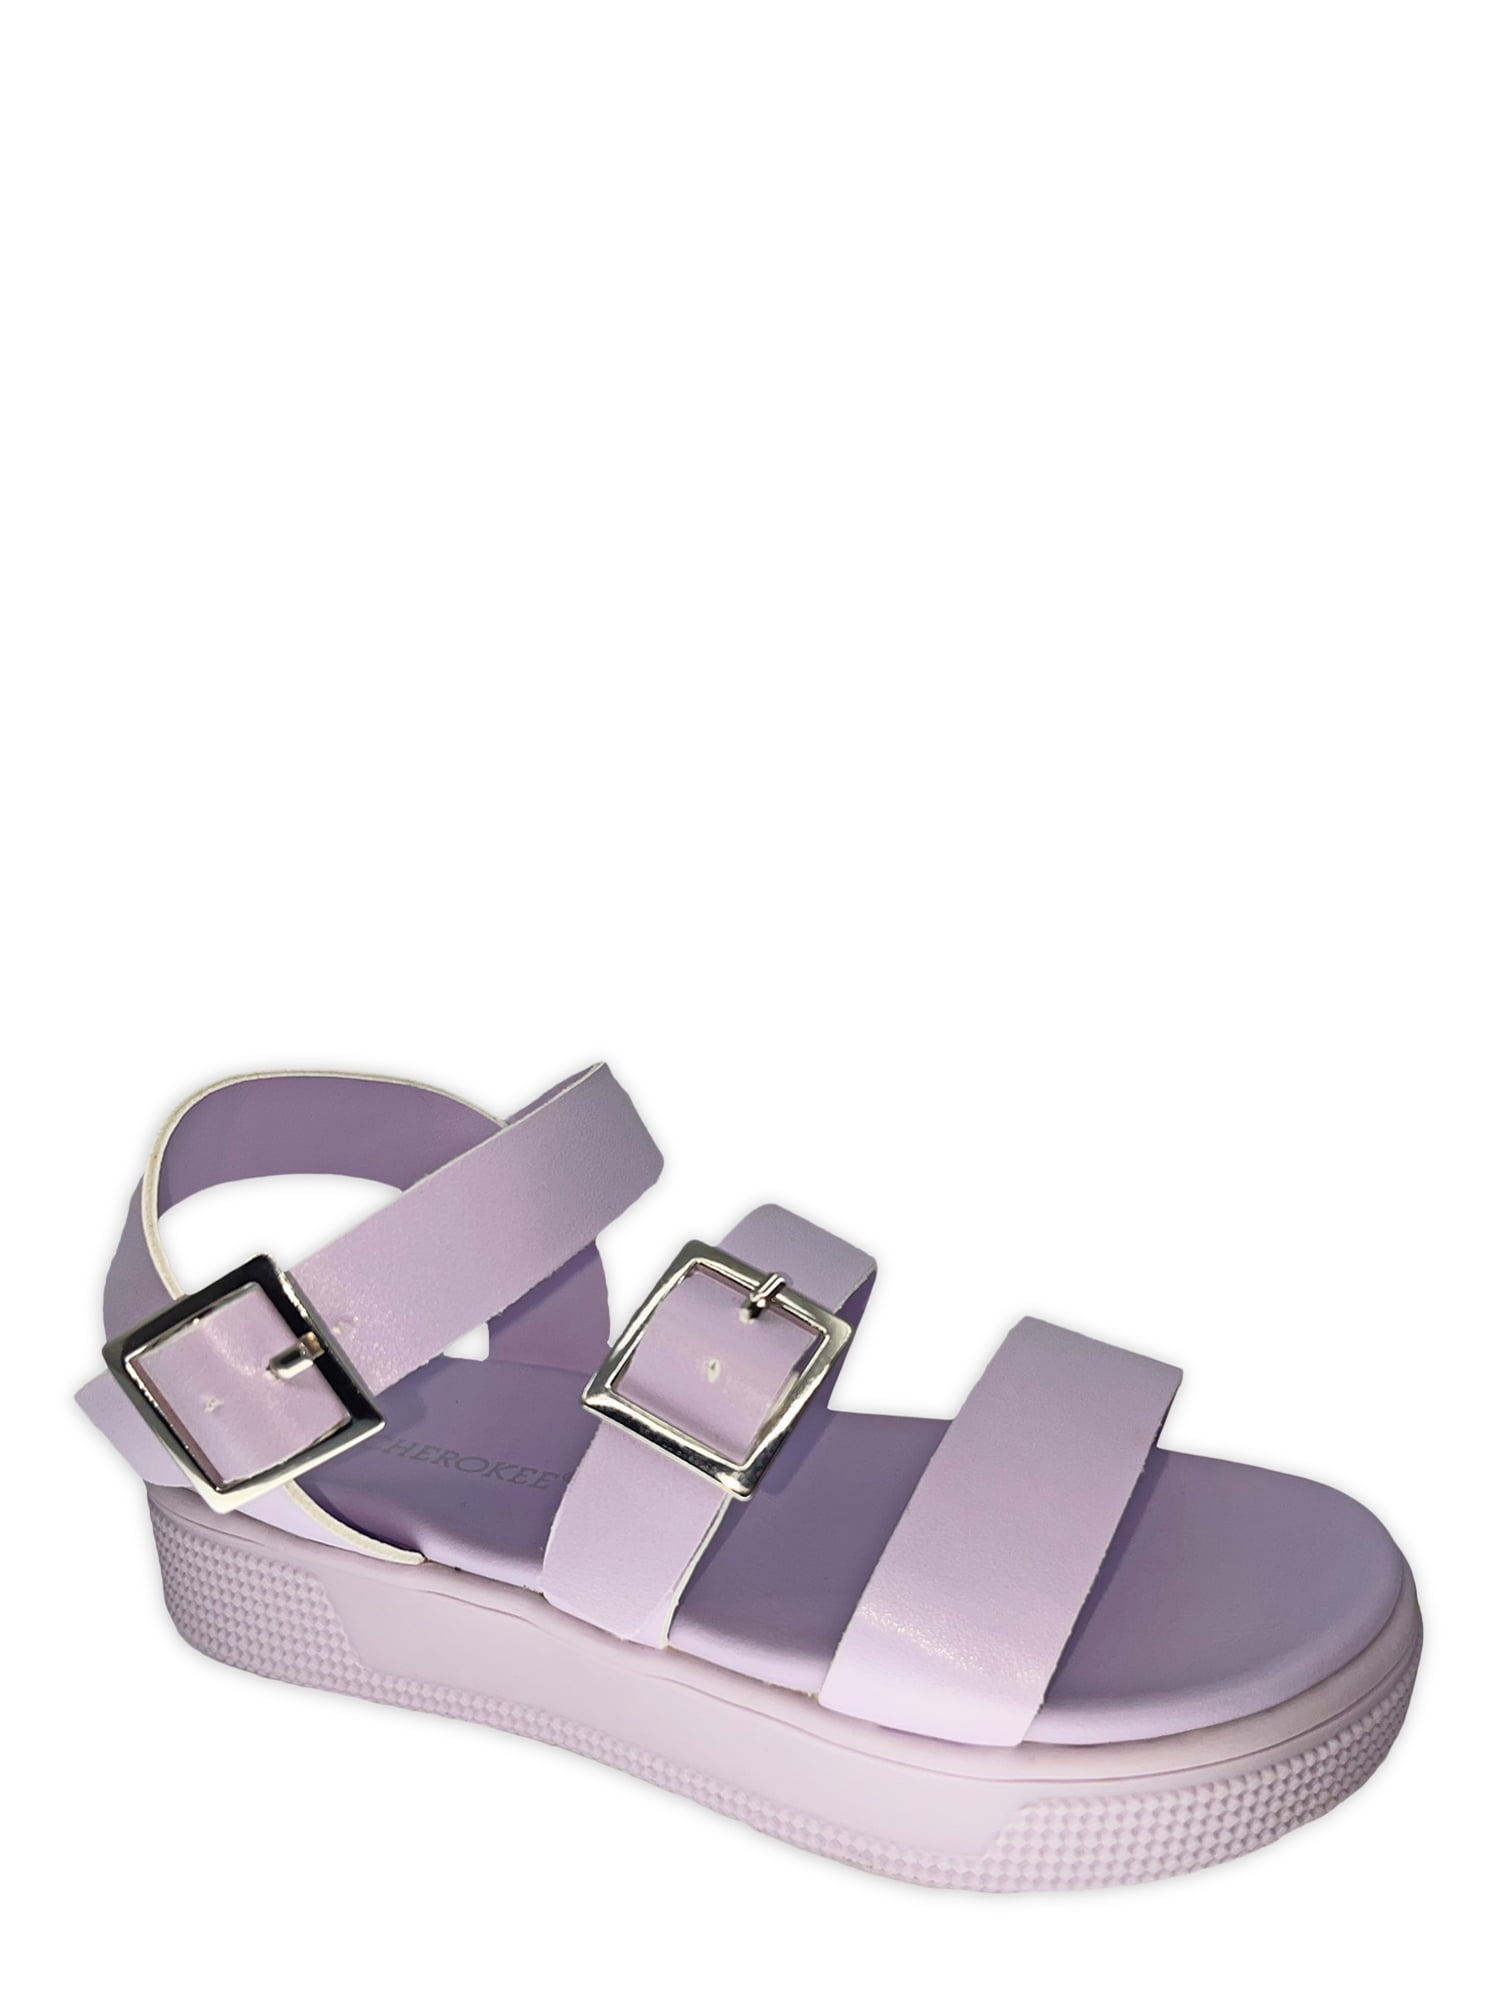 Girls' Sandals (11-3): Cherokee Platform, Material Girl Butterfly Gladiator, Love 83 Clog, Rocawear Embellished Flat & More $7.99 + Free S&H w/ Walmart+ or $35+